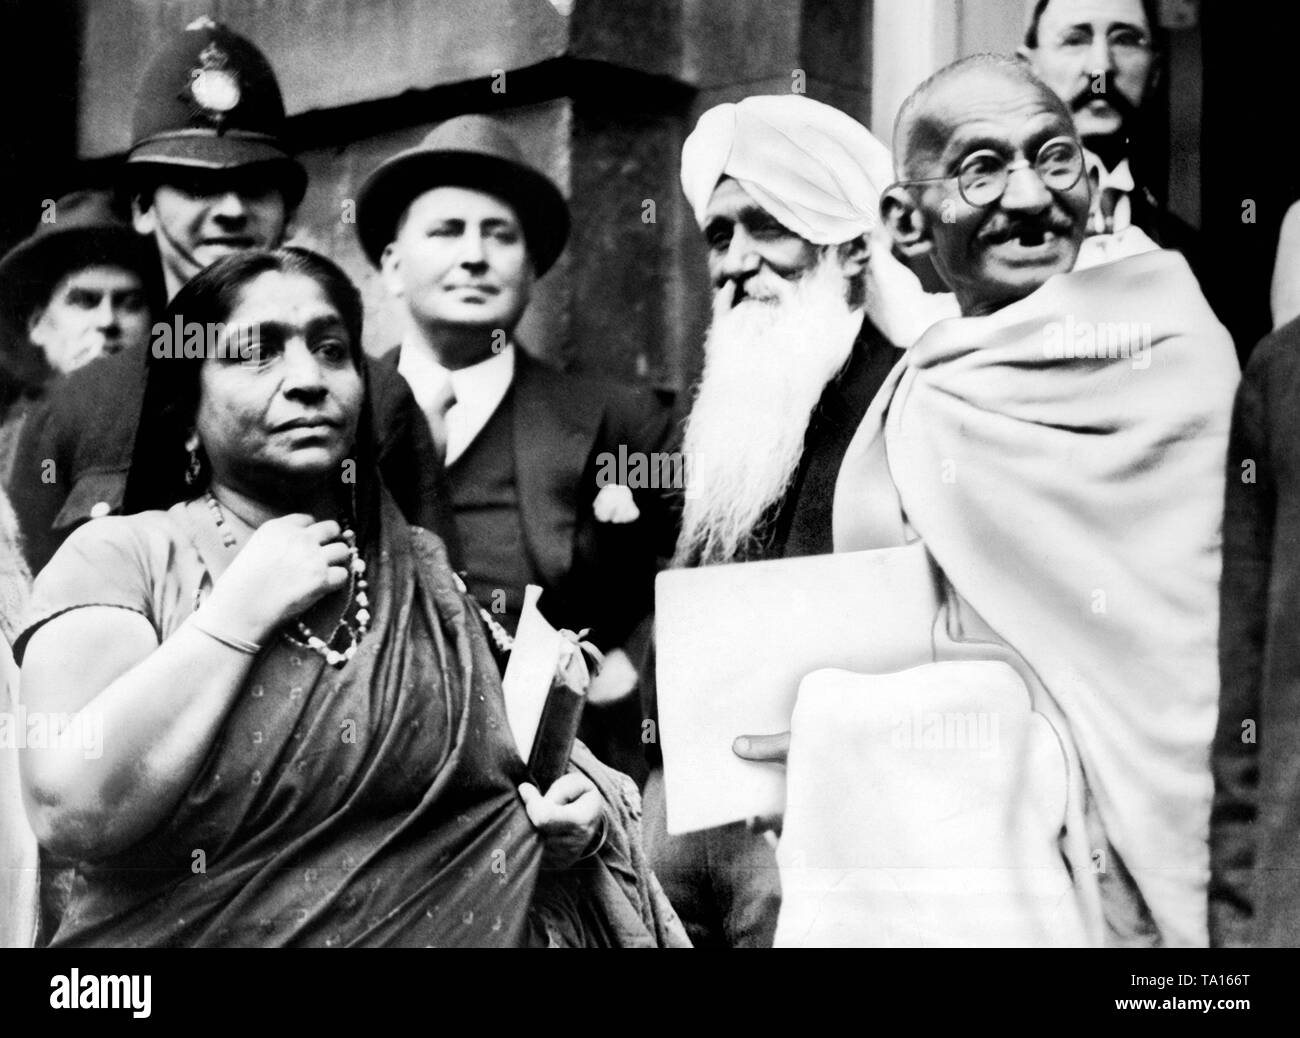 The Indian Nationalist leader Mahatma Gandhi leaves the St. James's Palace, along with the poet and politician Sarojini Naidu and Sir Pattani, following the Indian Round Table Conference. Stock Photo